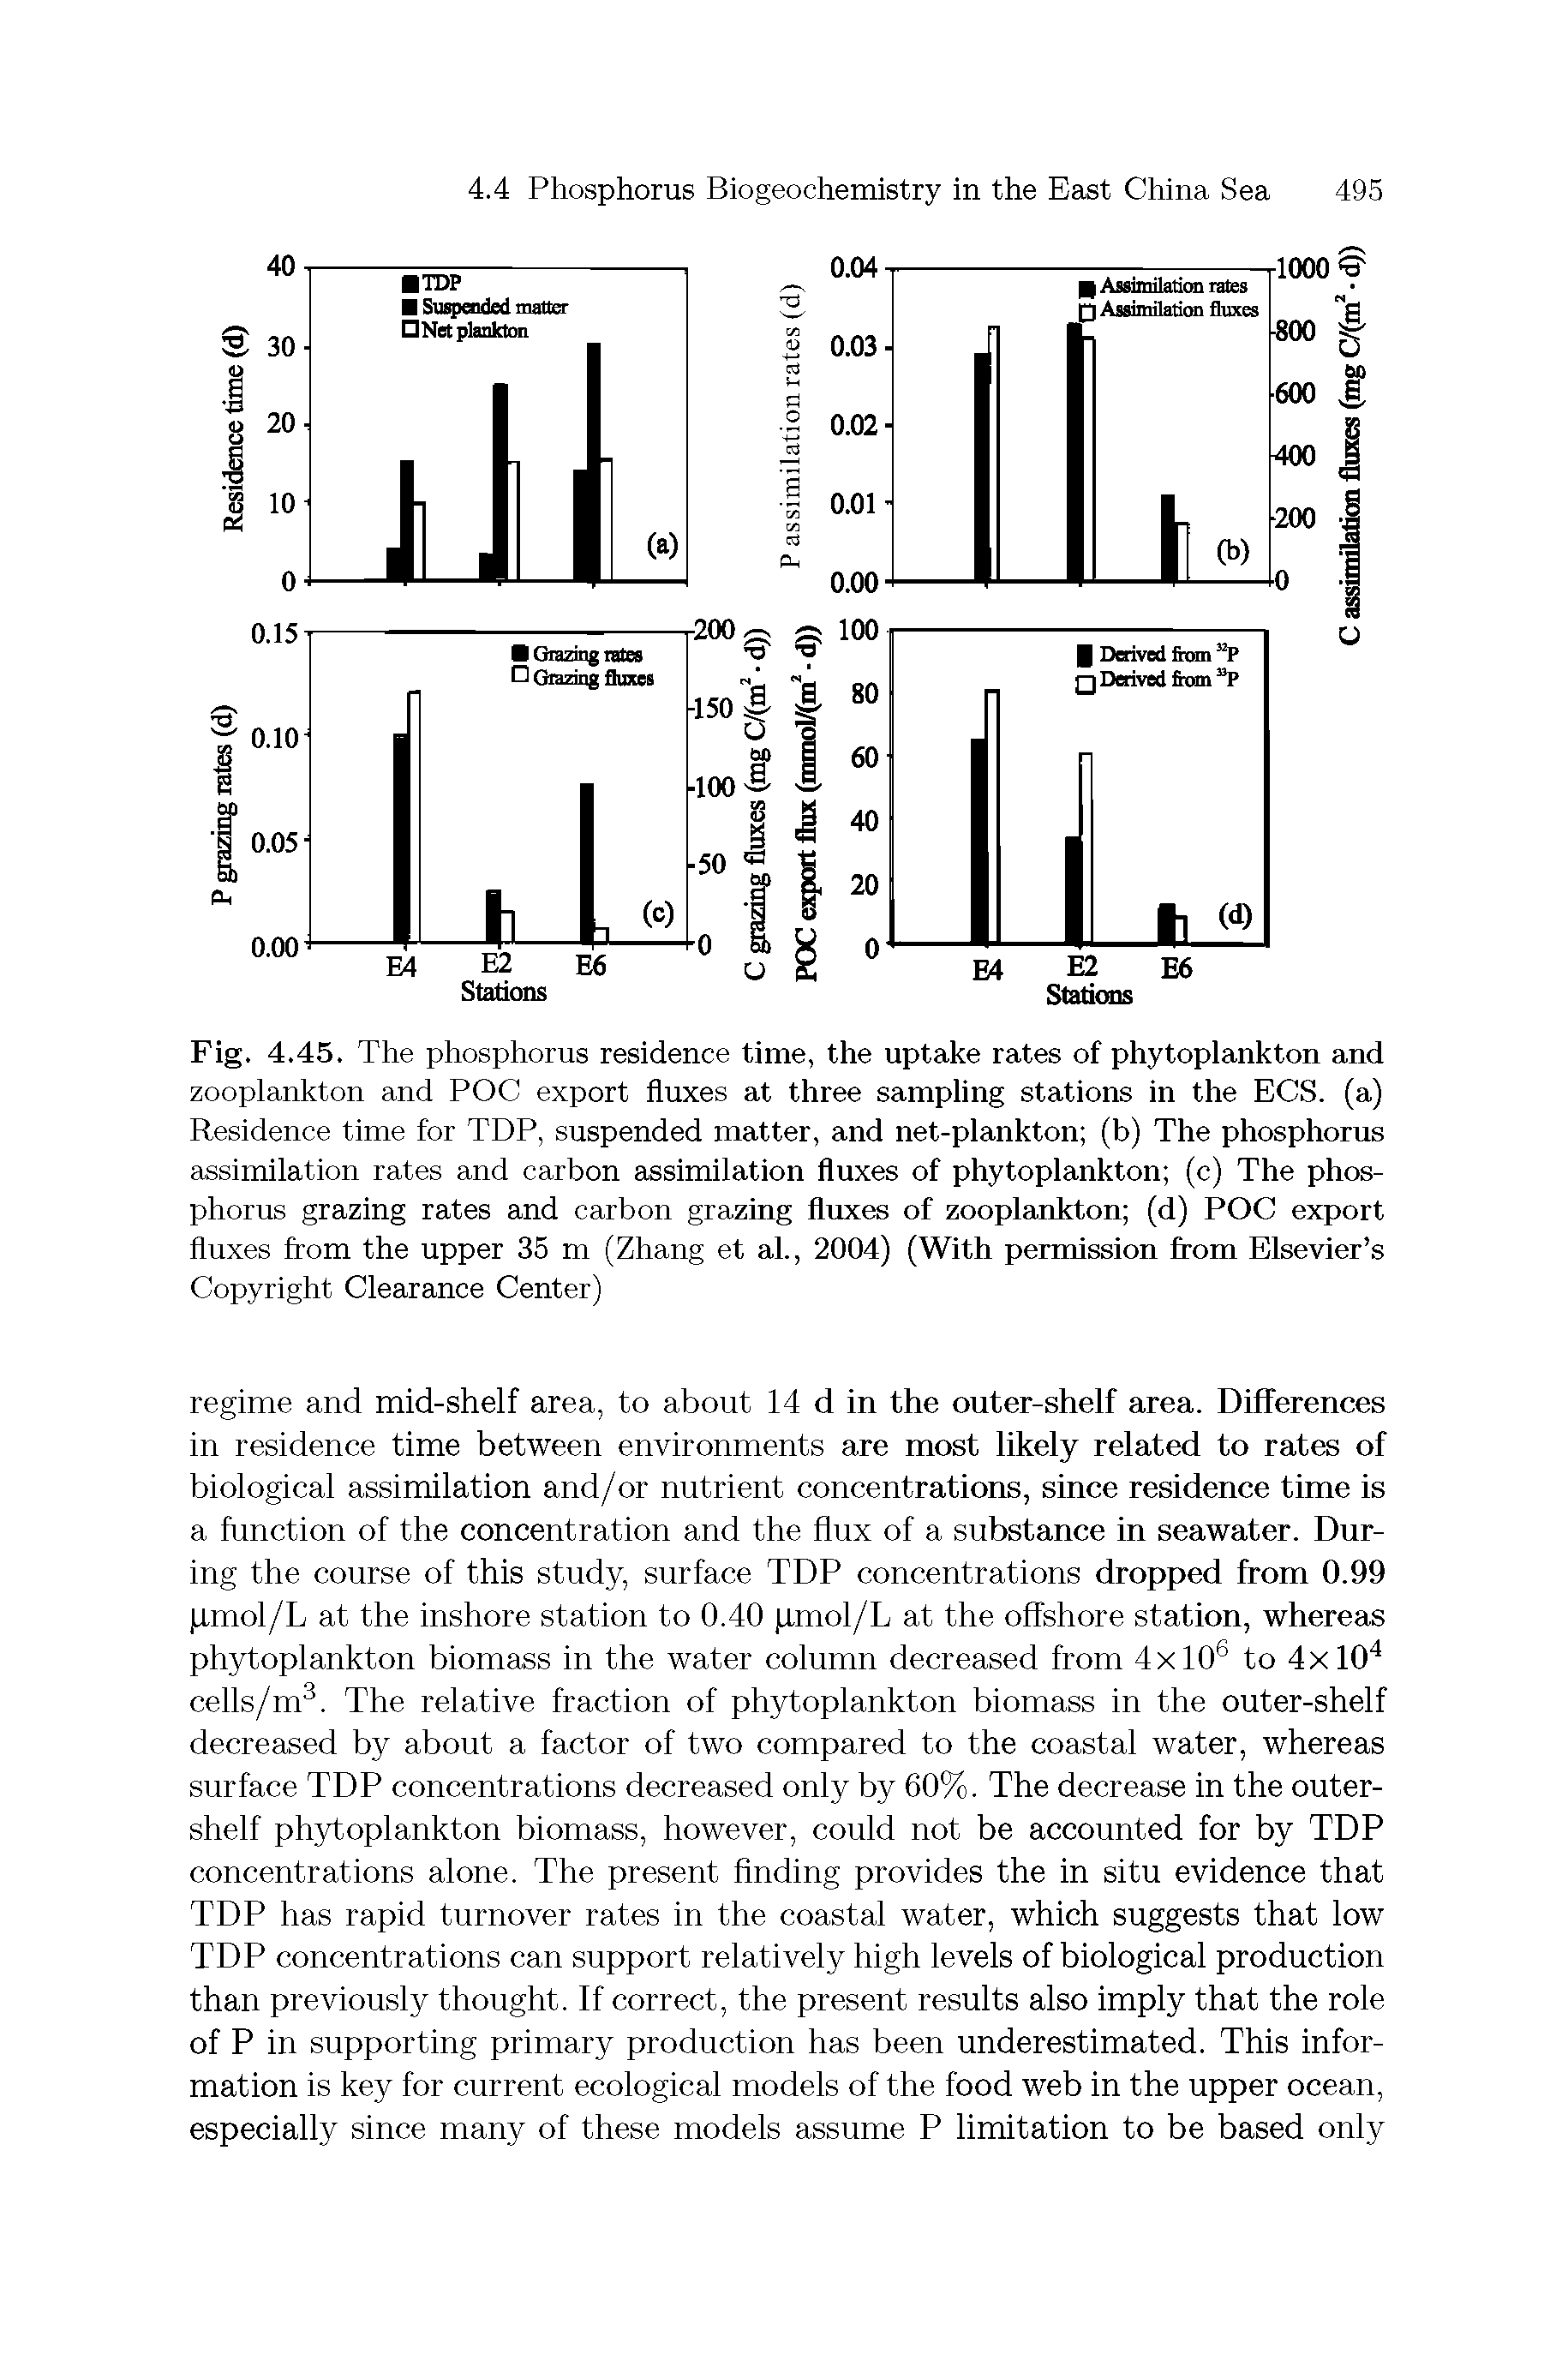 Fig. 4.45. The phosphorus residence time, the uptake rates of phytoplankton and zooplankton and POC export fluxes at three sampling stations in the ECS. (a) Residence time for TDP, suspended matter, and net-plankton (b) The phosphorus assimilation rates and carbon assimilation fluxes of phytoplankton (c) The phosphorus grazing rates and carbon grazing fluxes of zooplankton (d) POC export fluxes from the upper 35 m (Zhang et al., 2004) (With permission from Elsevier s Copyright Clearance Center)...